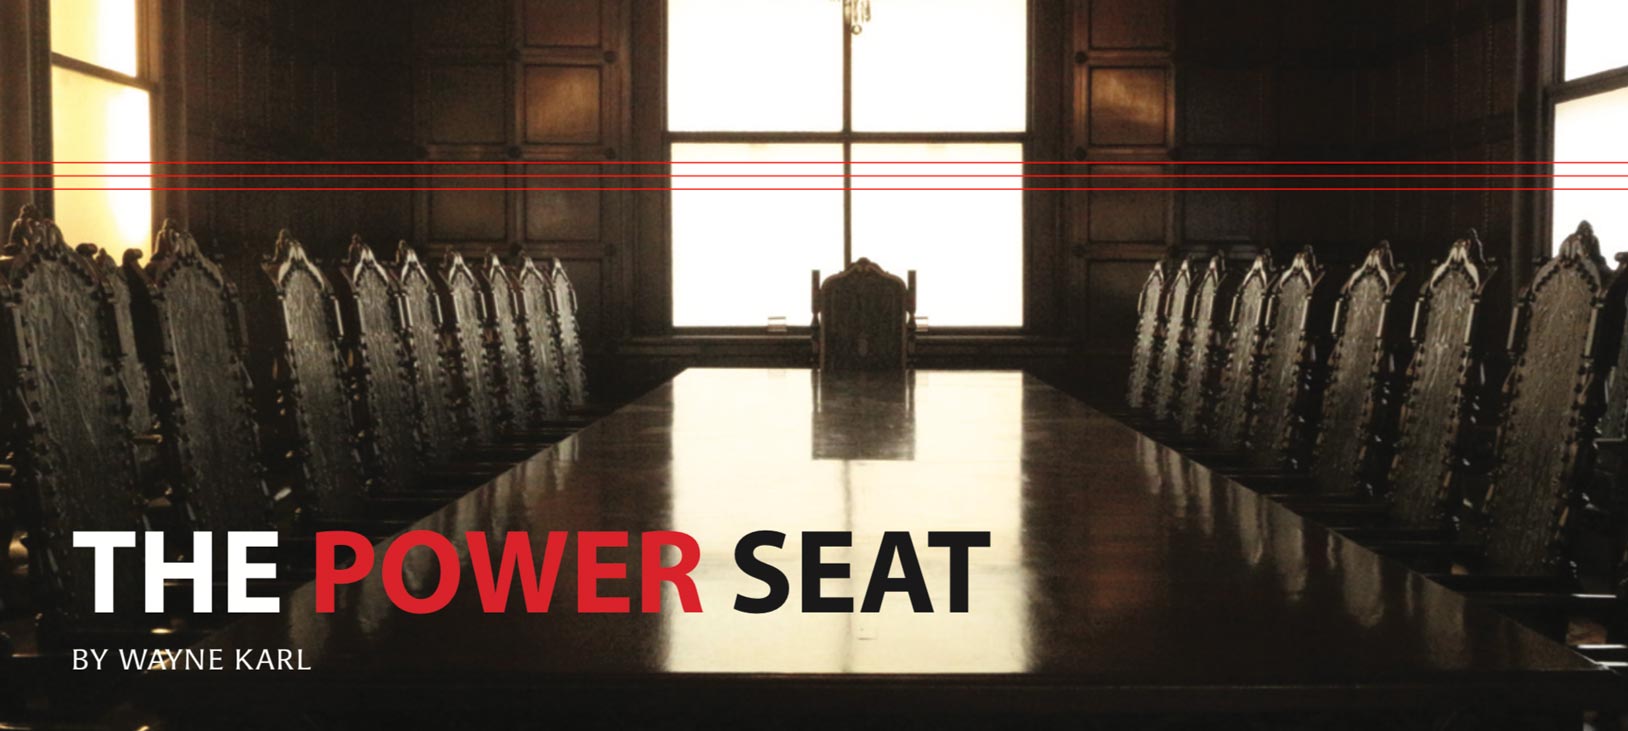 The Power Seat